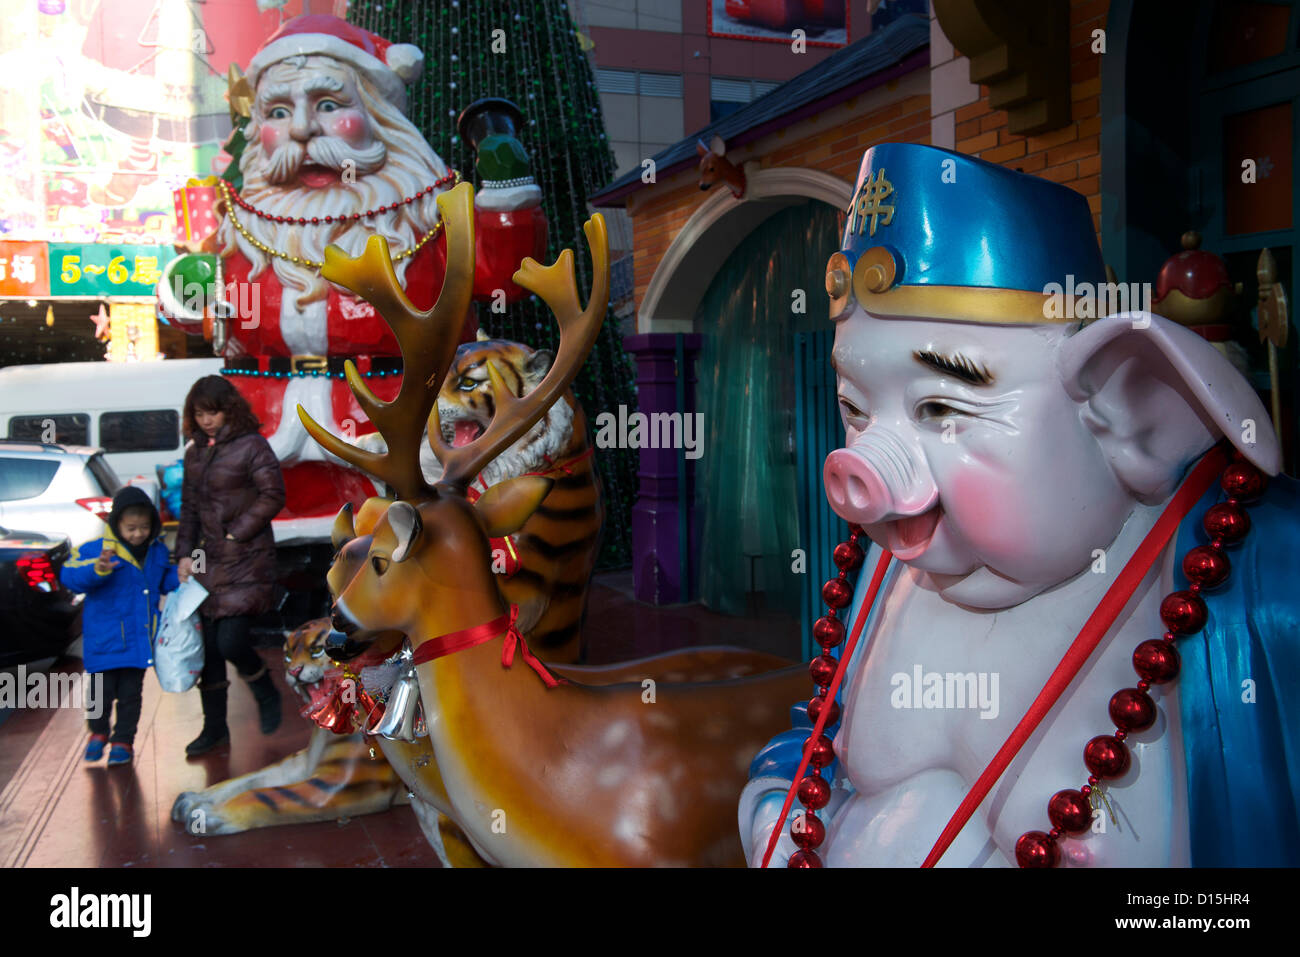 Chinese mother and her son walk along a huge Santa Claus and a statue of Zhu Bajie(Pigsy or Pig), which is one of the three helpers of Xuanzang in the classic Chinese novel Journey to the West outside a commodity market on December 8, 2012 in Beijing, China. Stock Photo